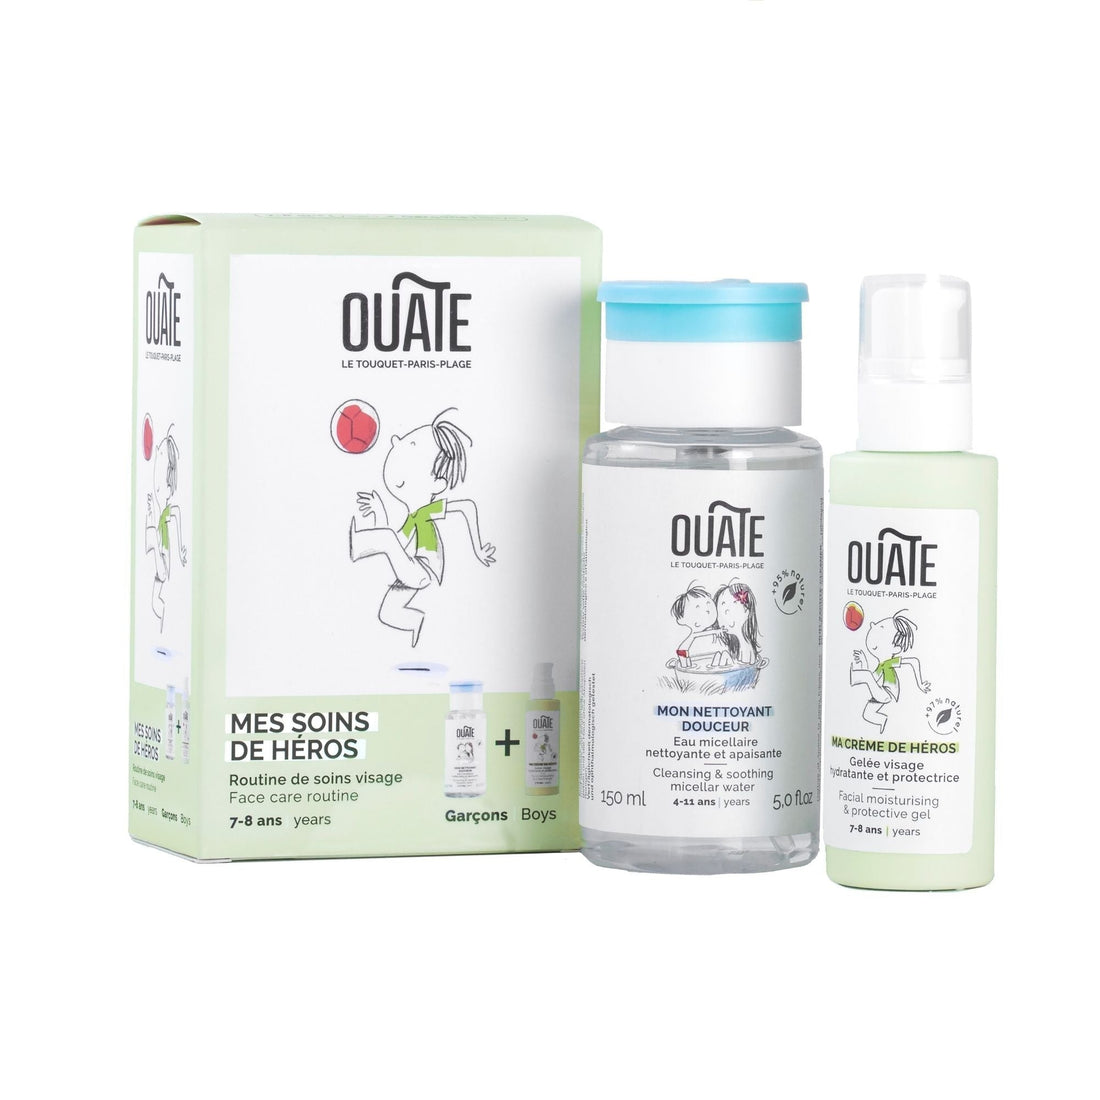 ouate-my-hero-skincare-set-7-8y-boy-ouat-1503020- (1)